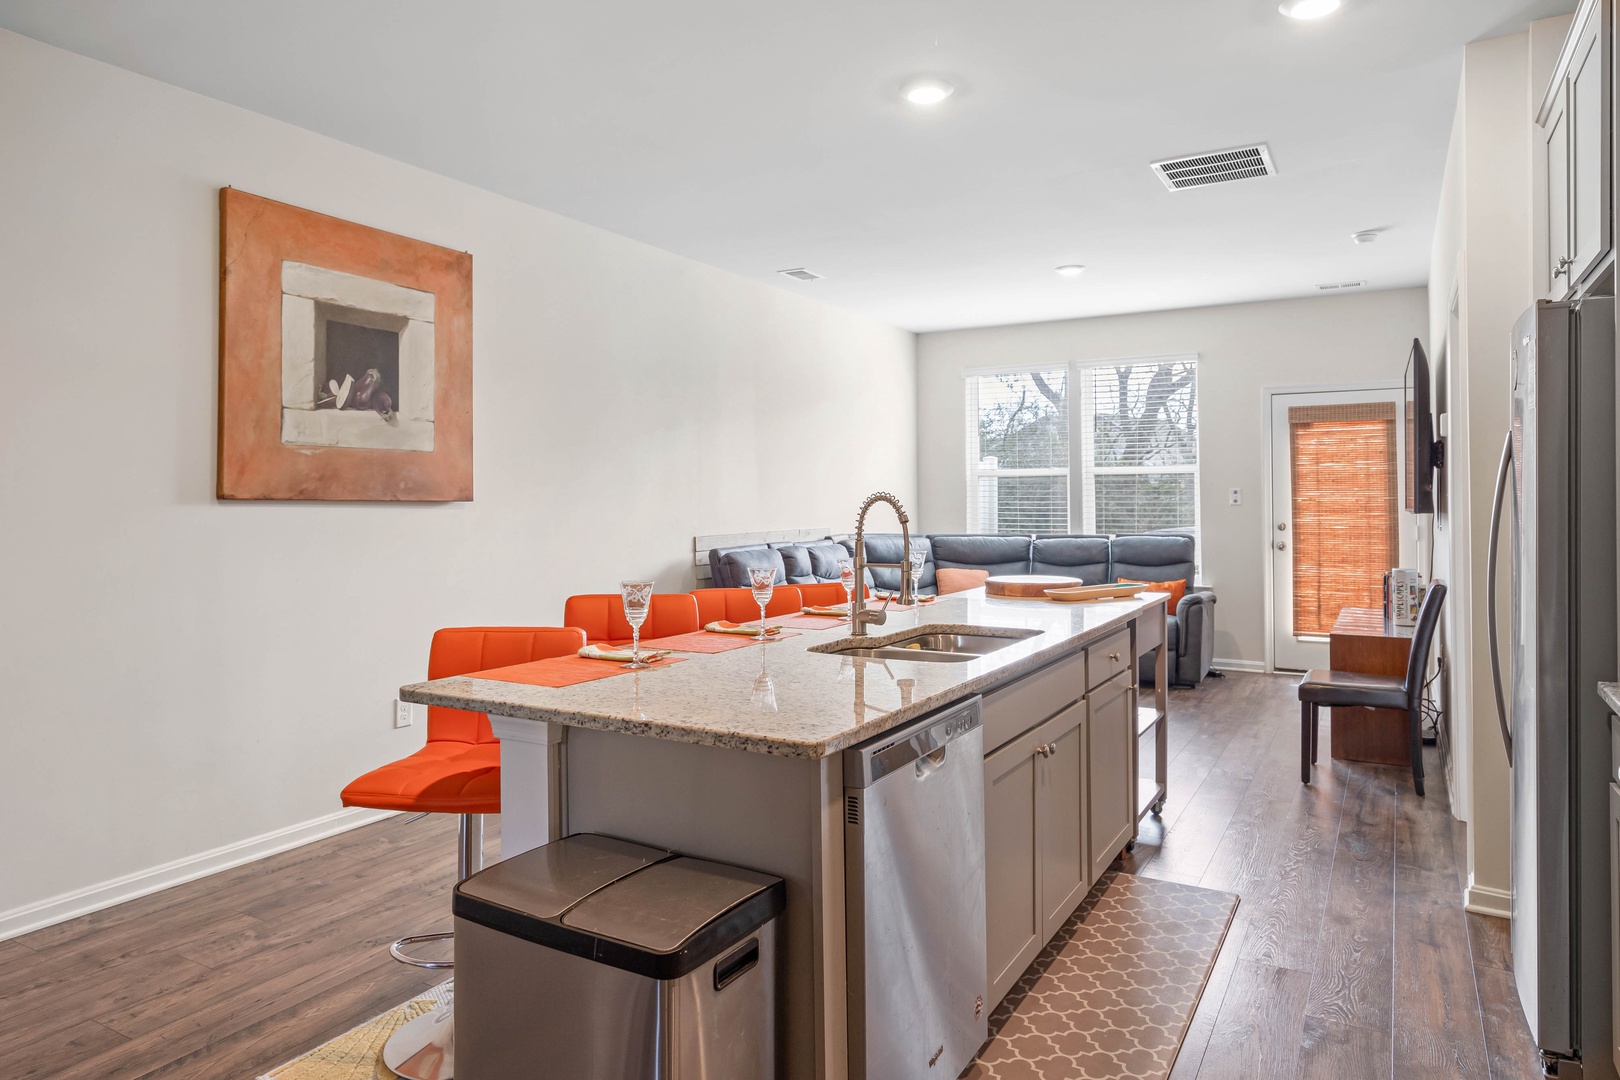 The chic, updated kitchen offers ample space & all the comforts of home